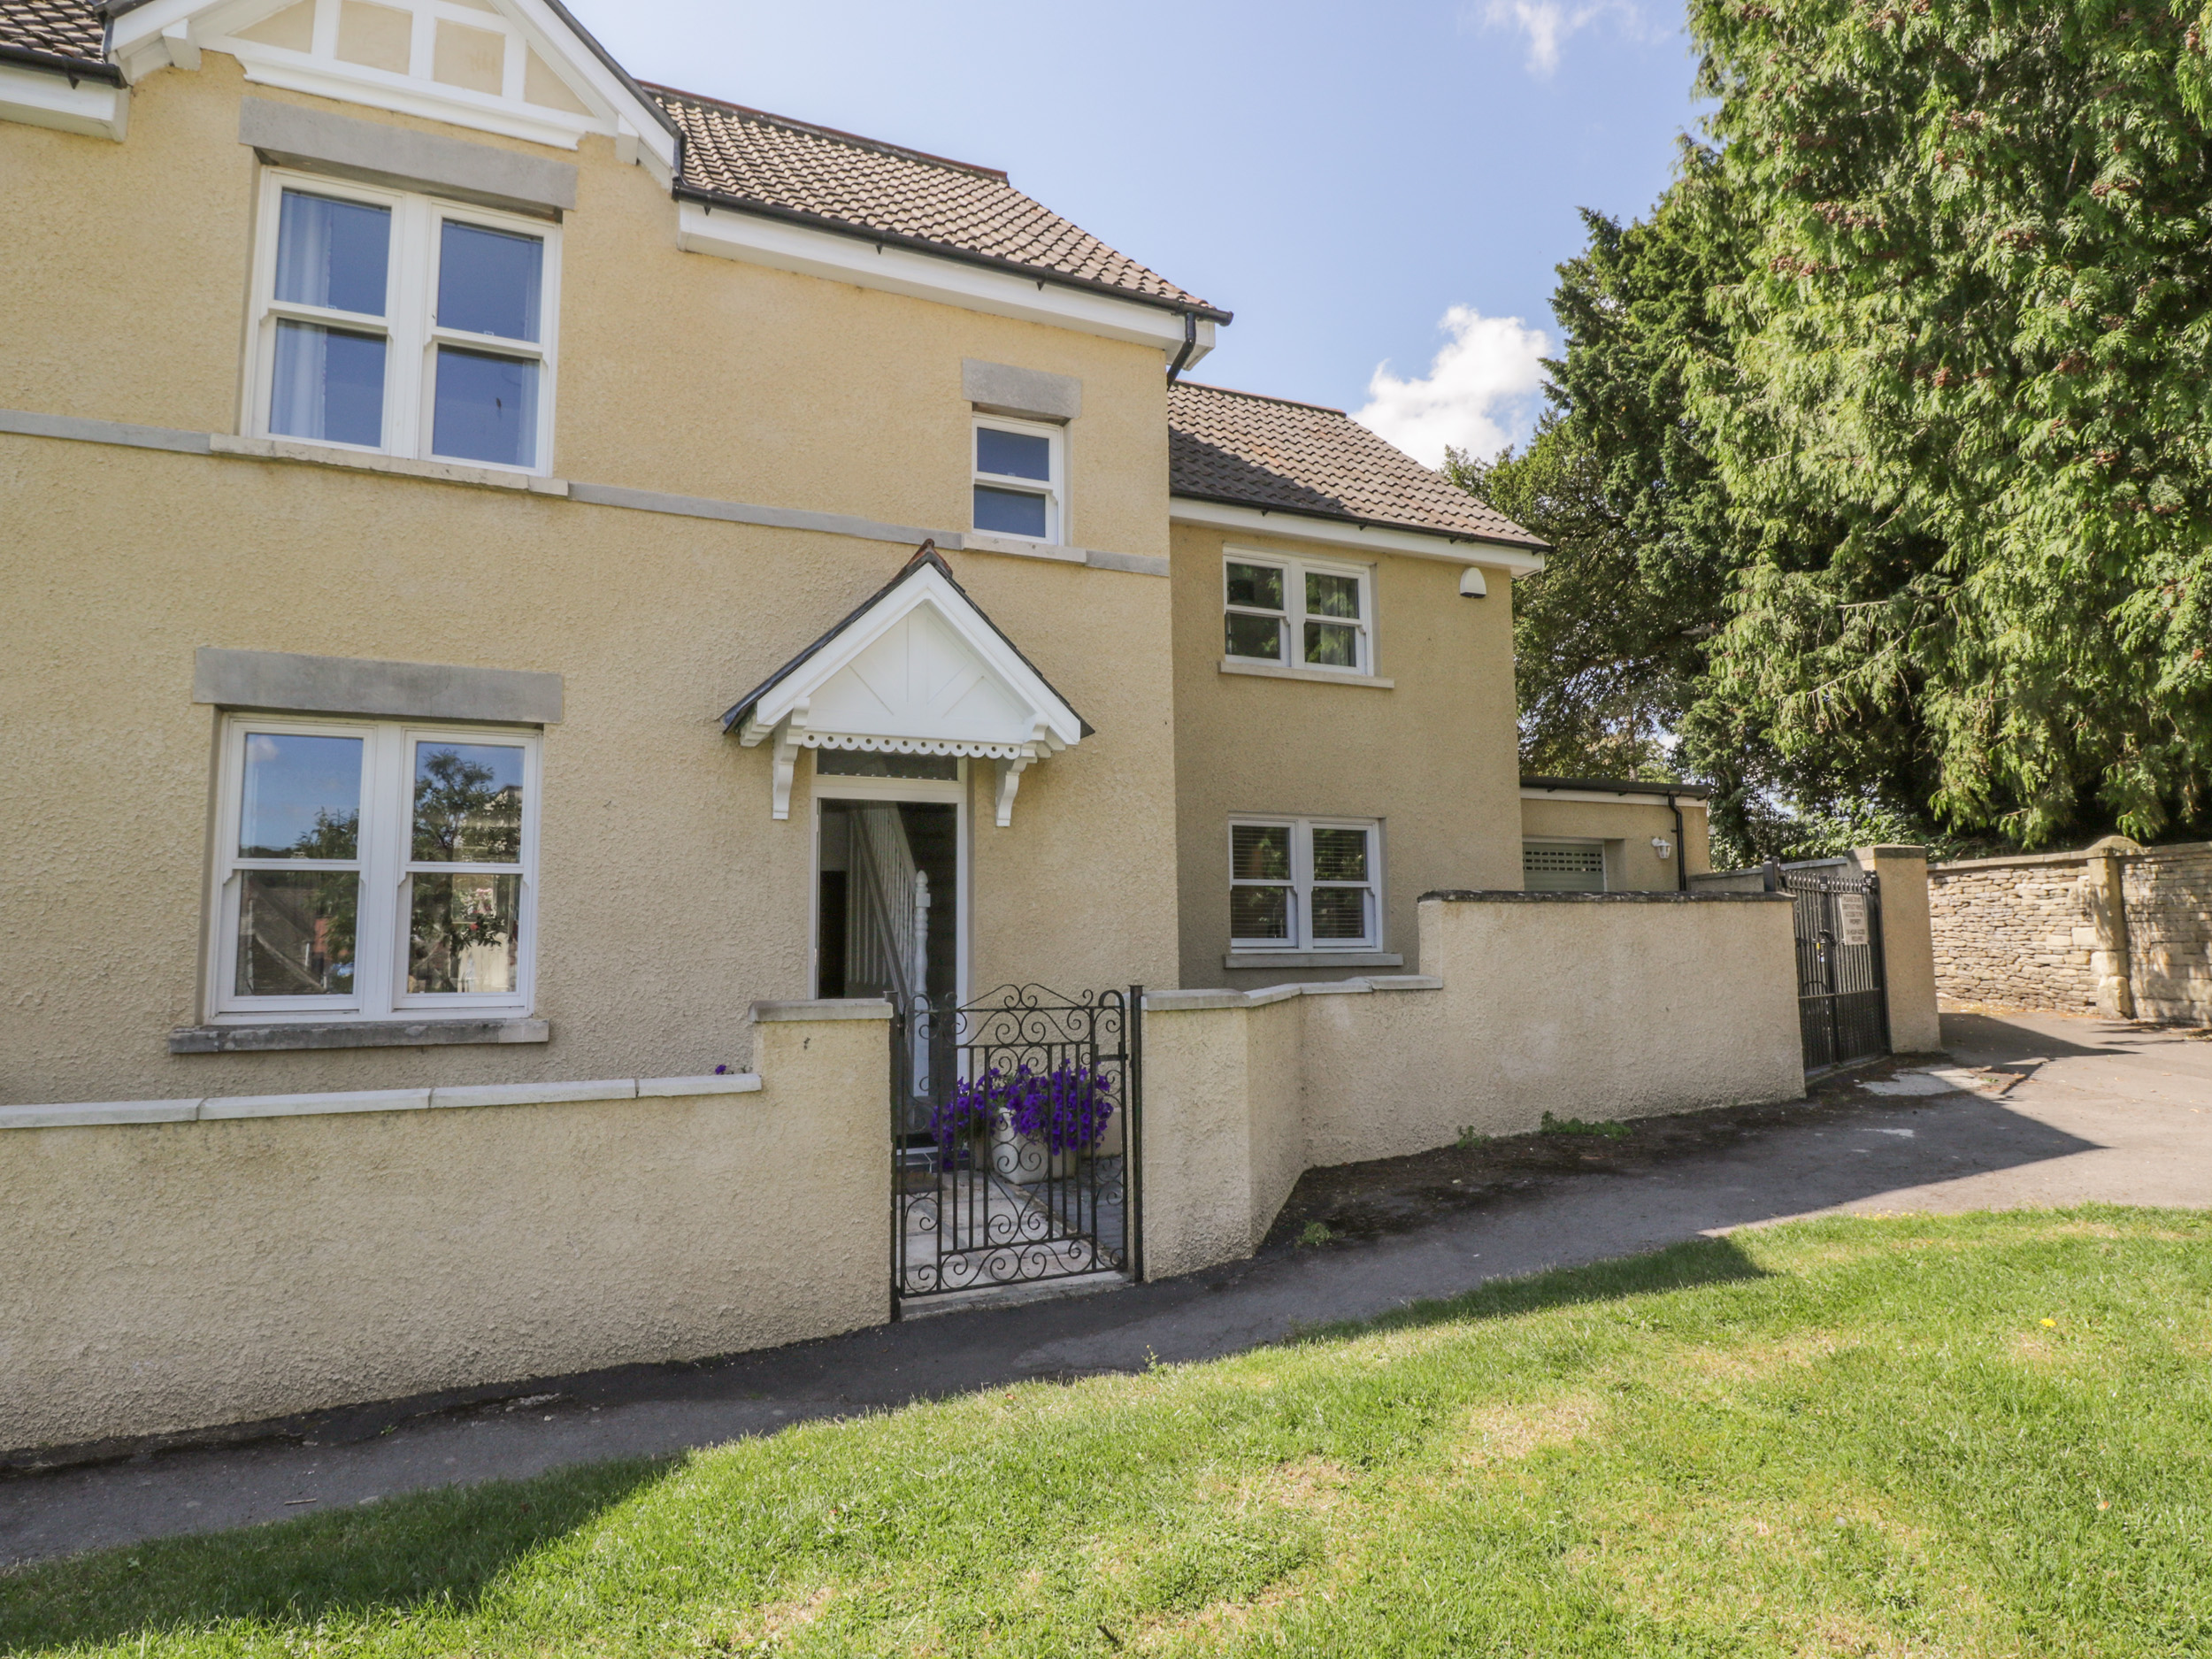 6 The Chipping, Wotton-Under-Edge